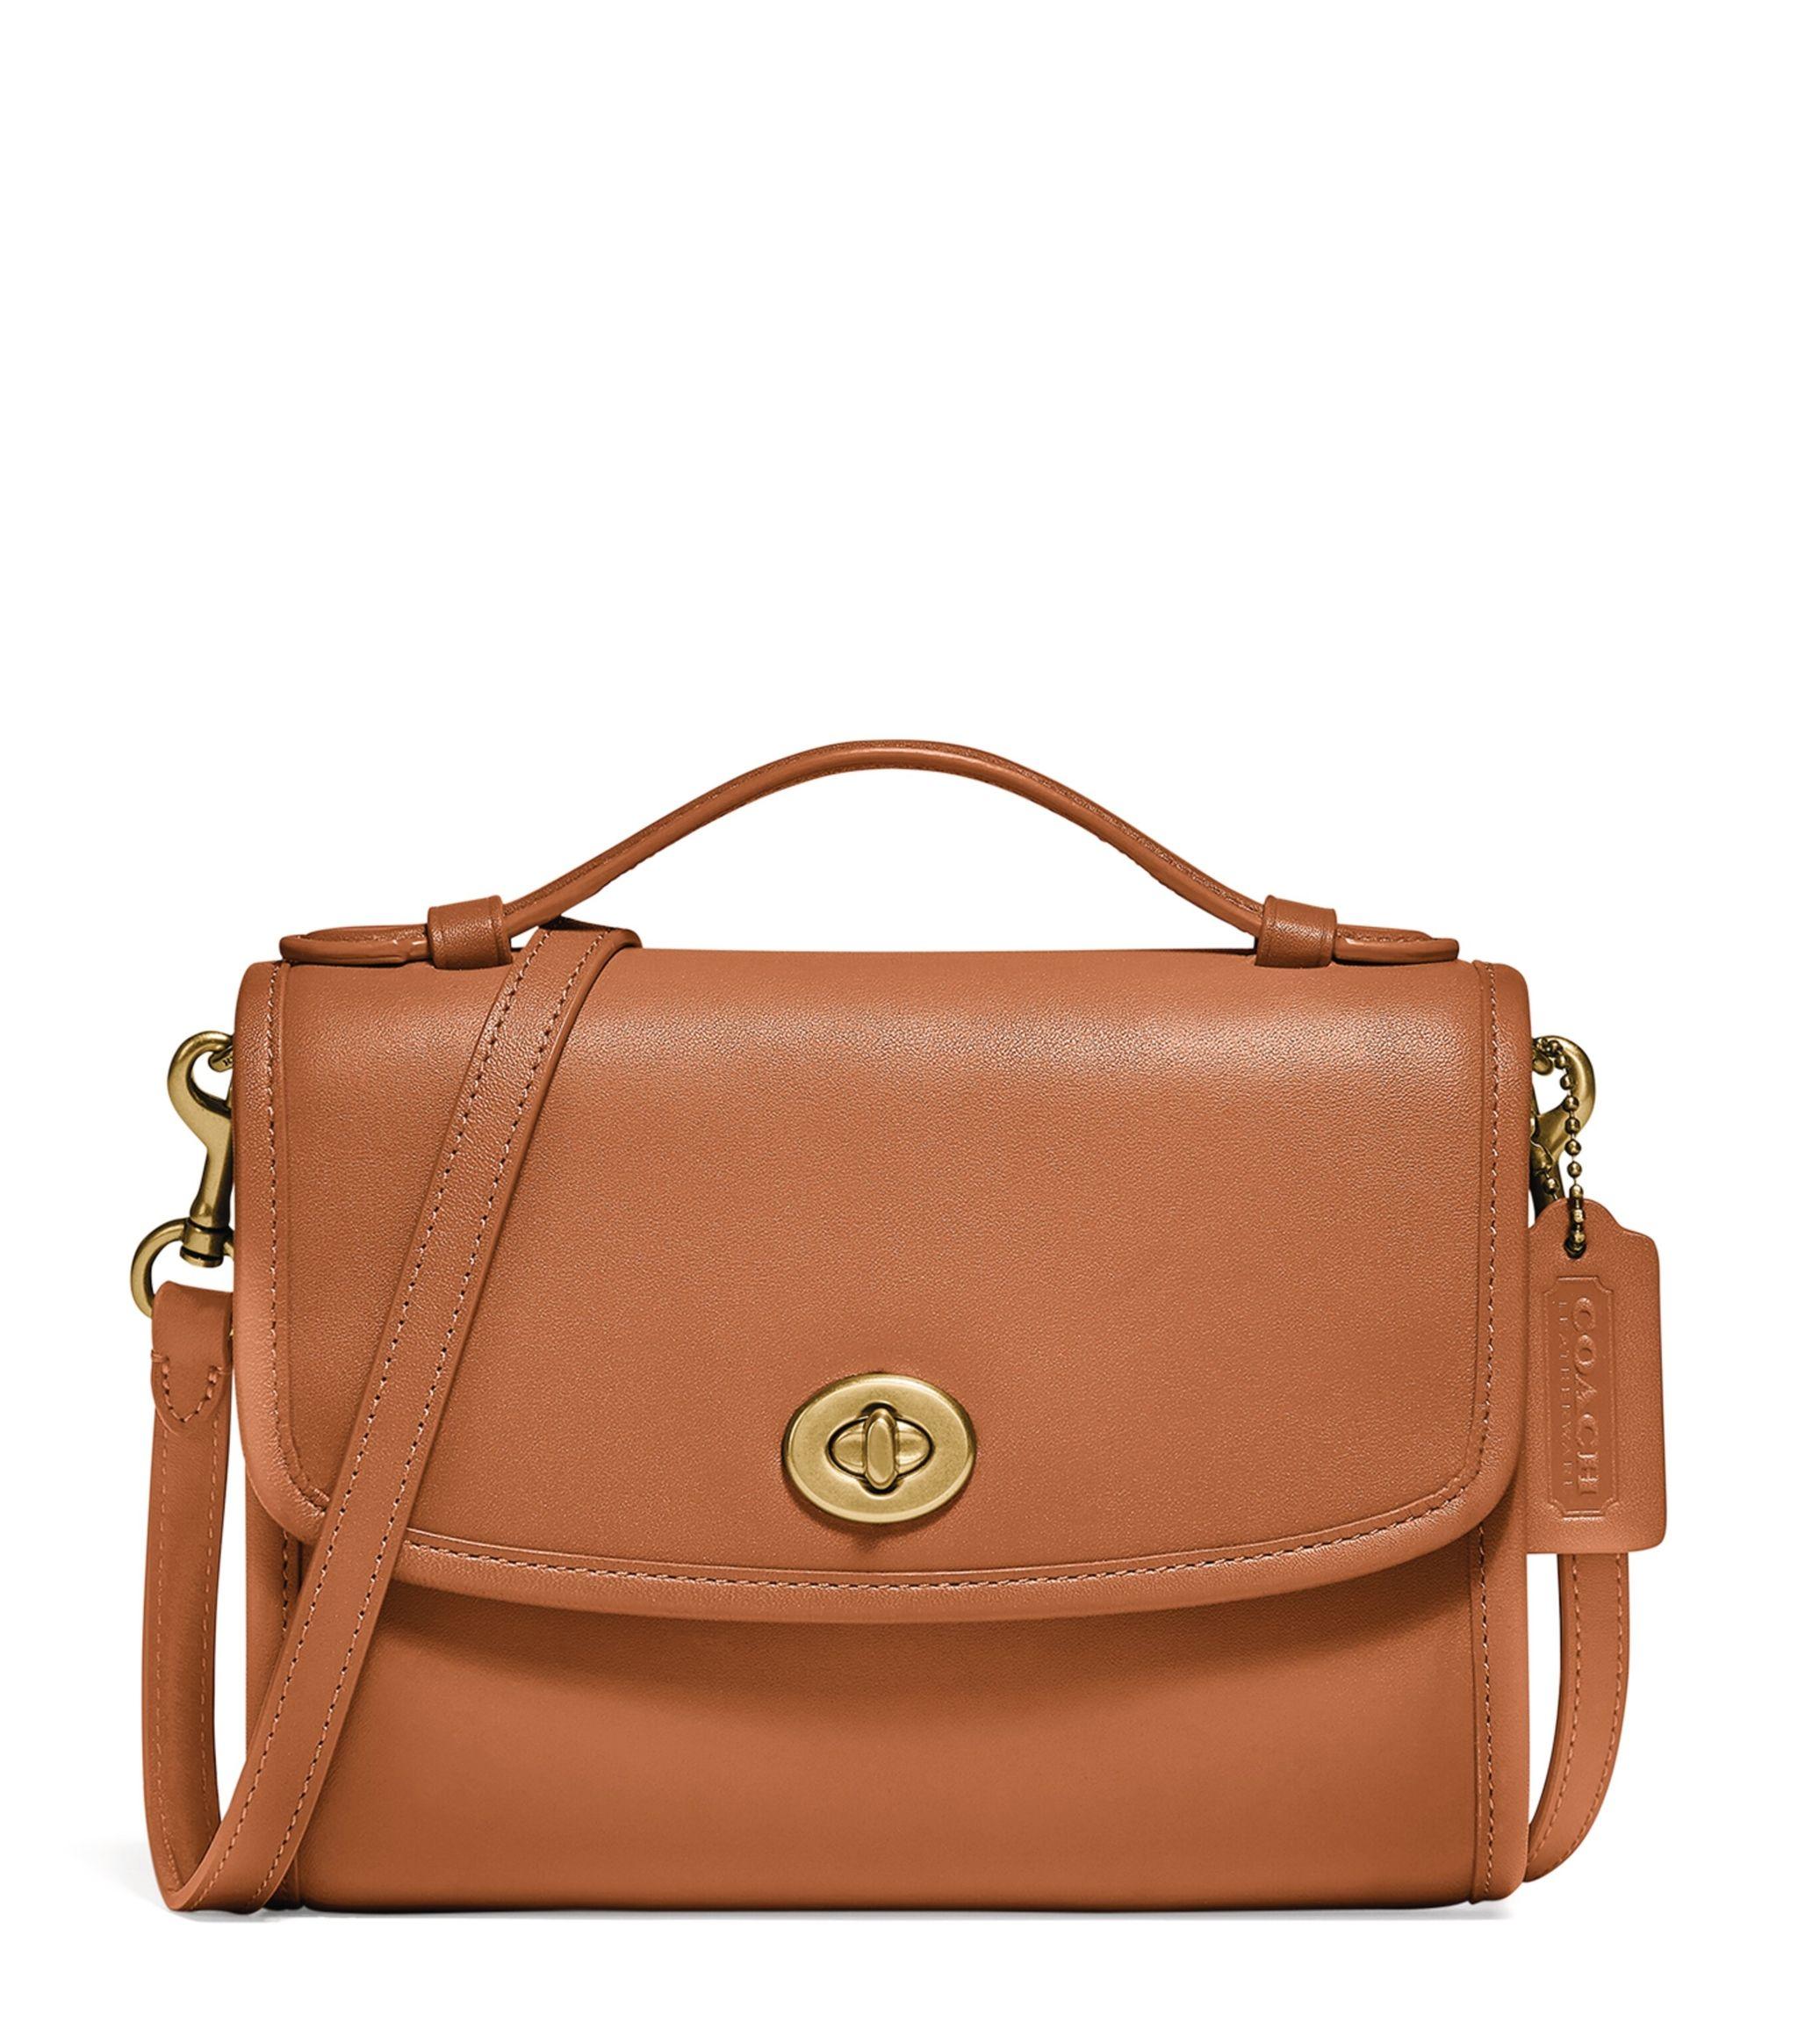 COACH Leather Kip Turnlock Cross-body Bag in Natural | Lyst